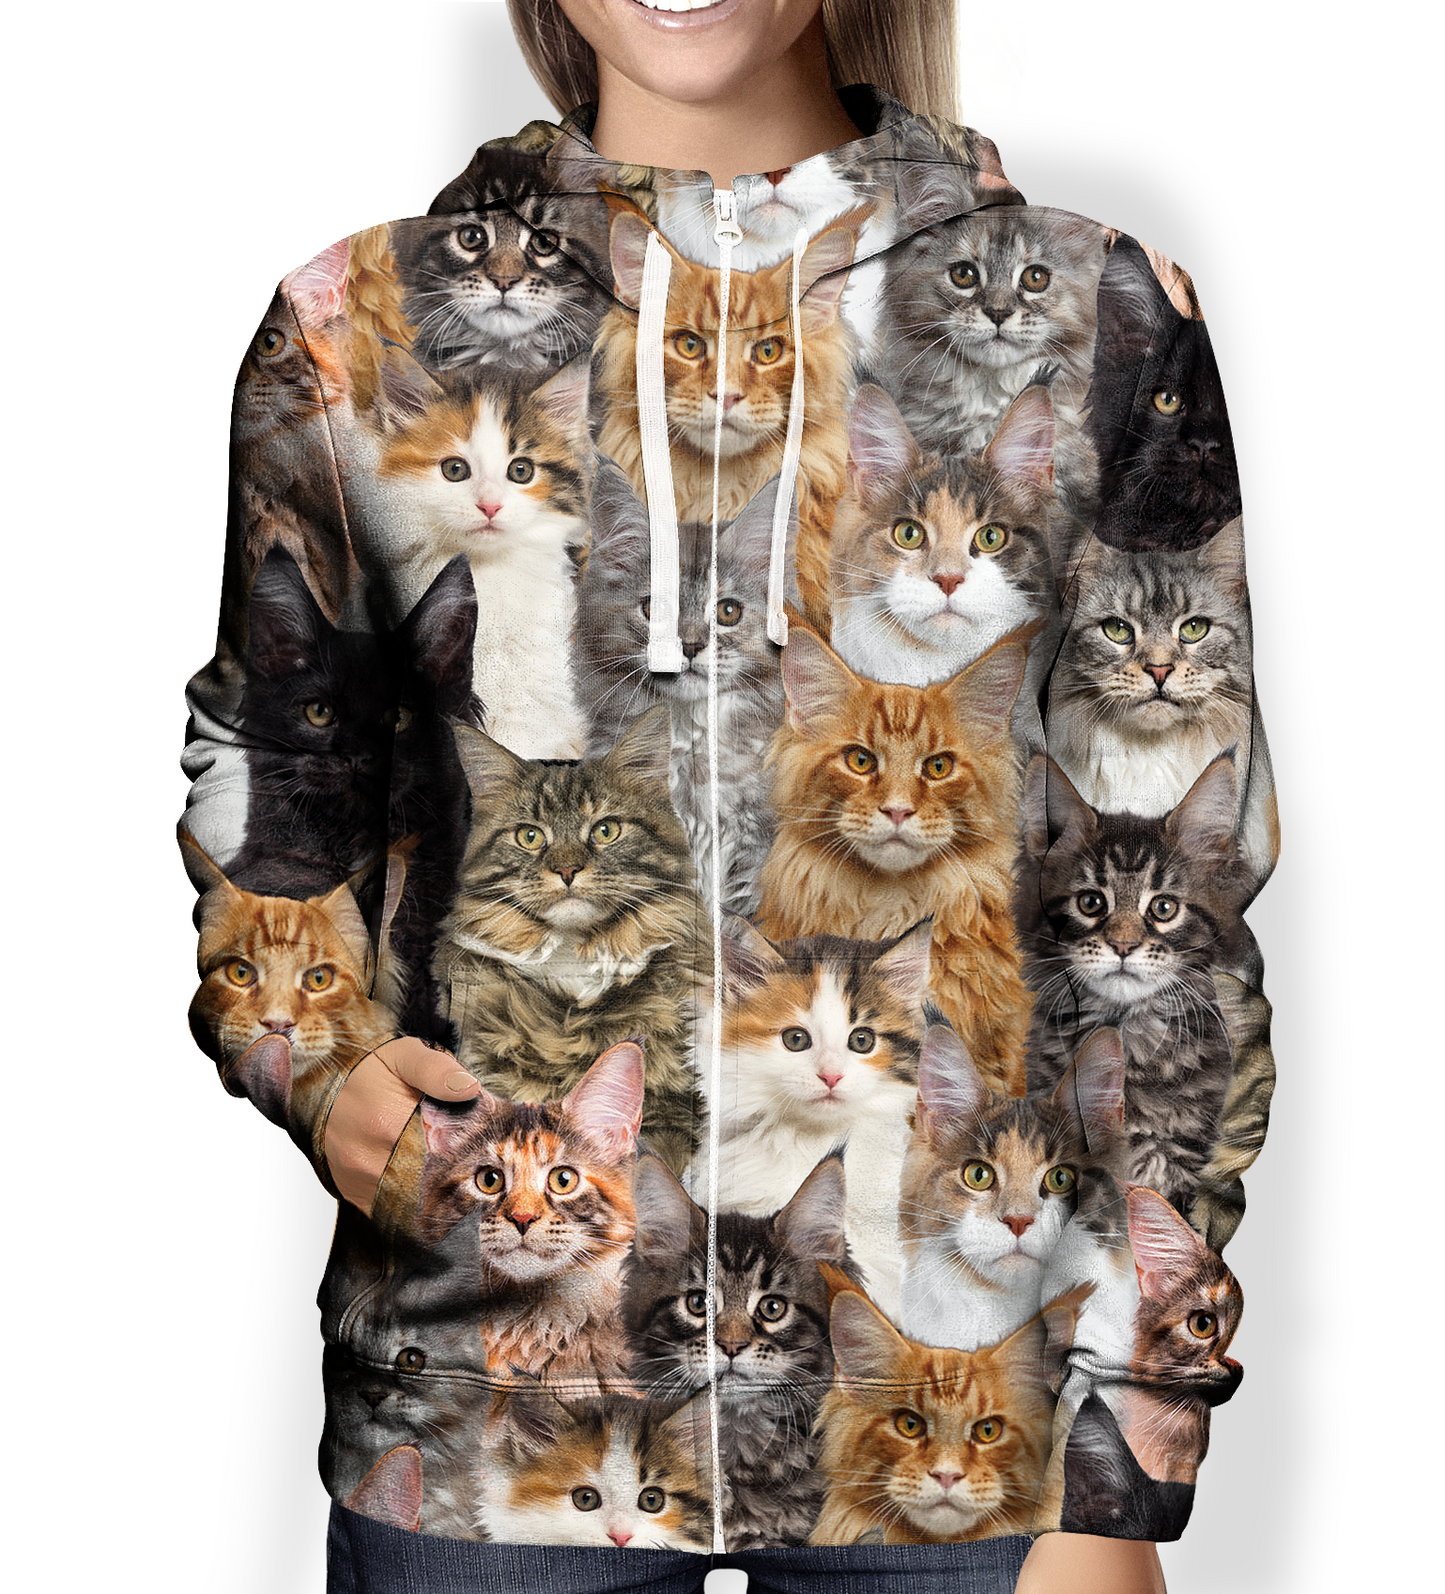 You Will Have A Bunch Of Maine Coon Cats - Hoodie V1